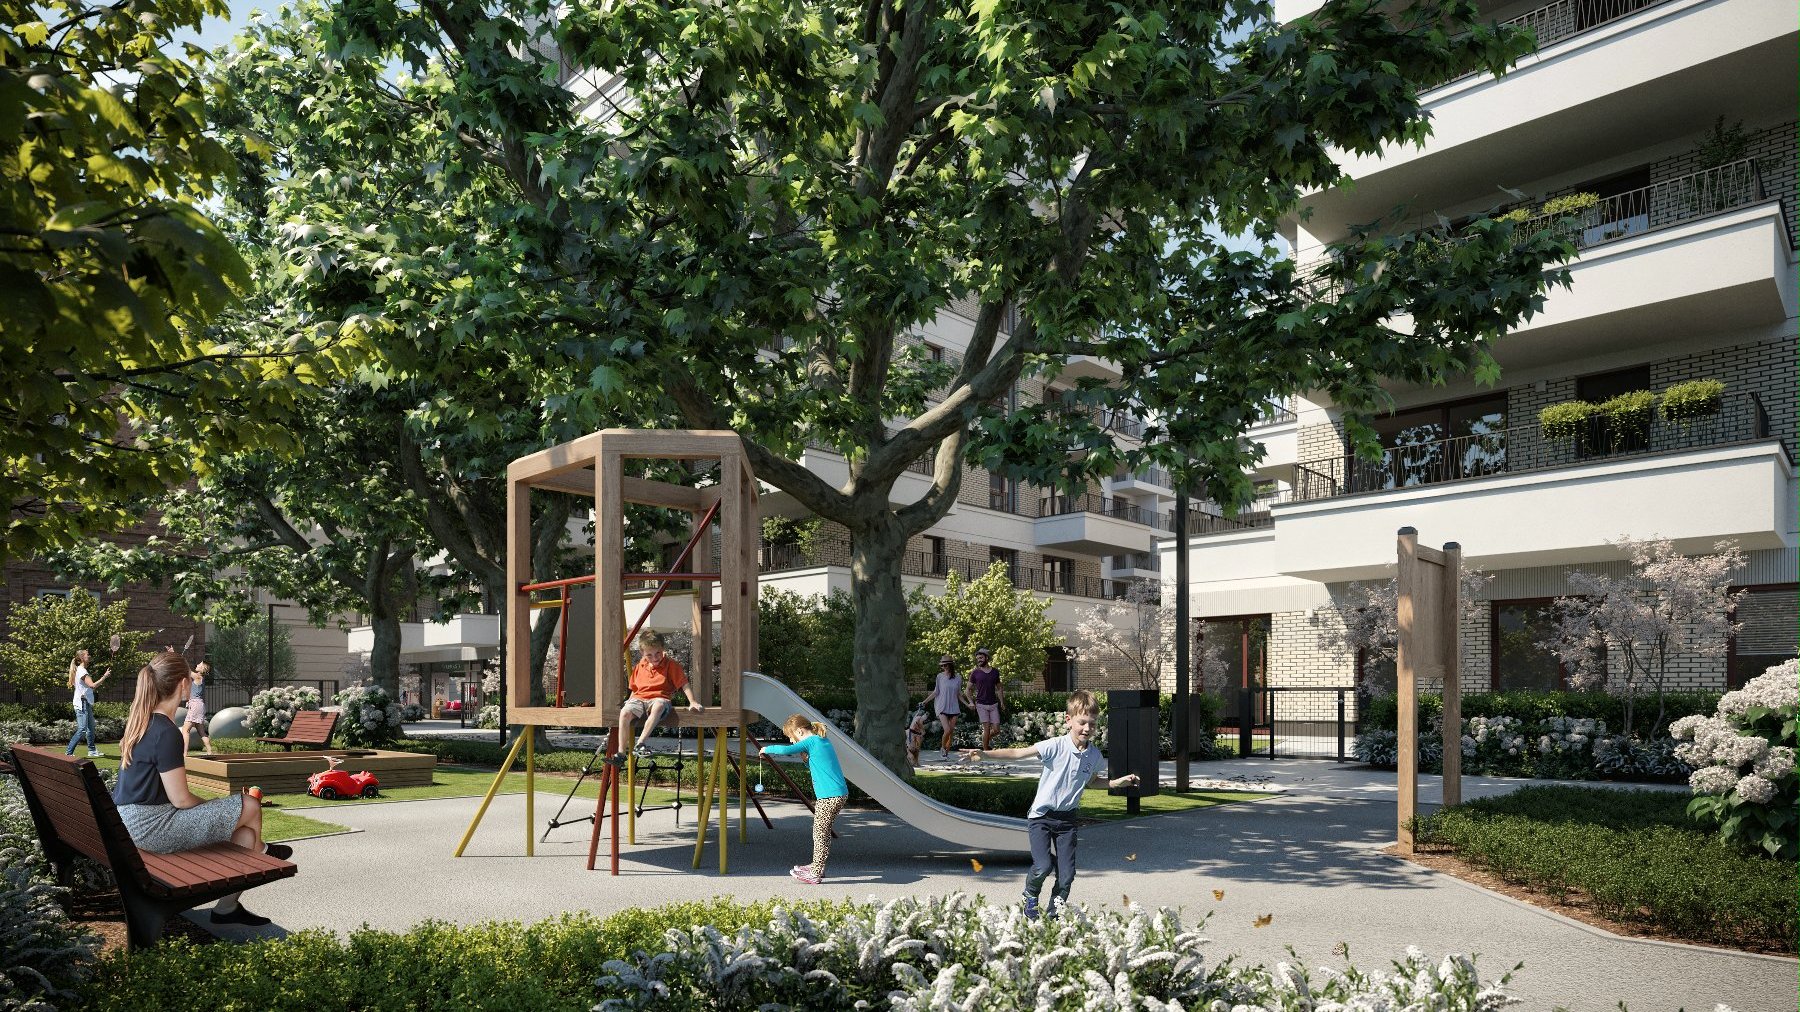 The image shows a visualisation of the playground at the Modena development. A green tree grows in the middle, with children playing all around.